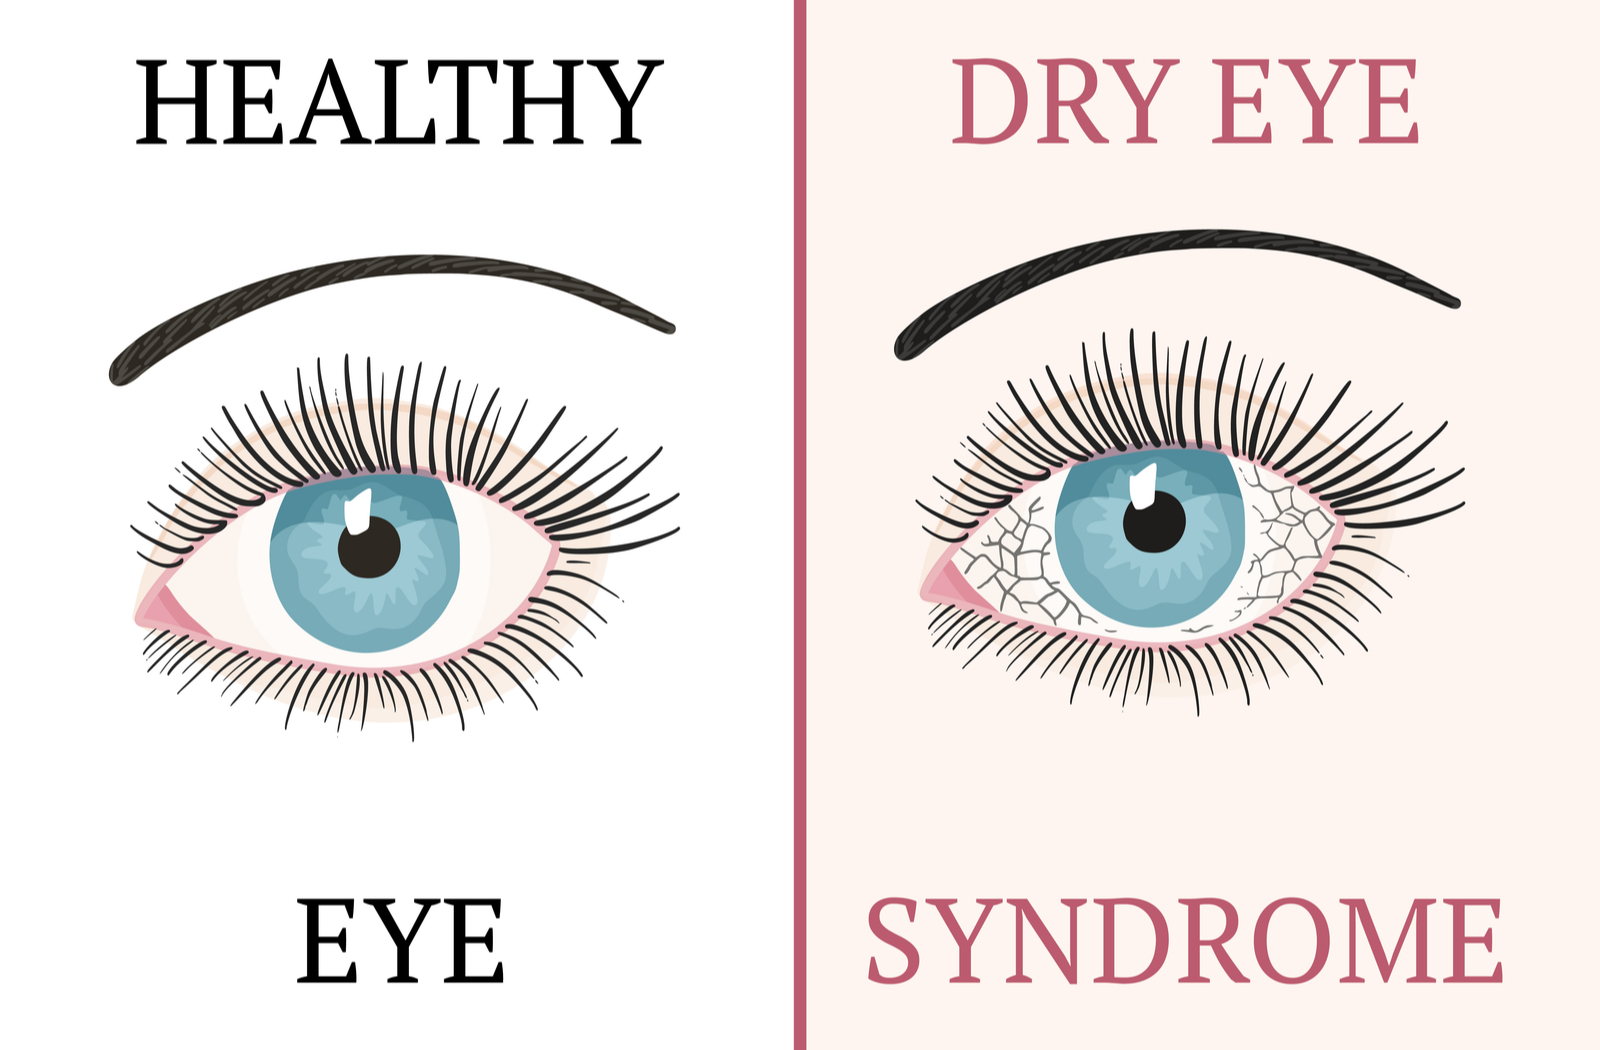 Healthy eye on the left compared with dry eye syndrome on right